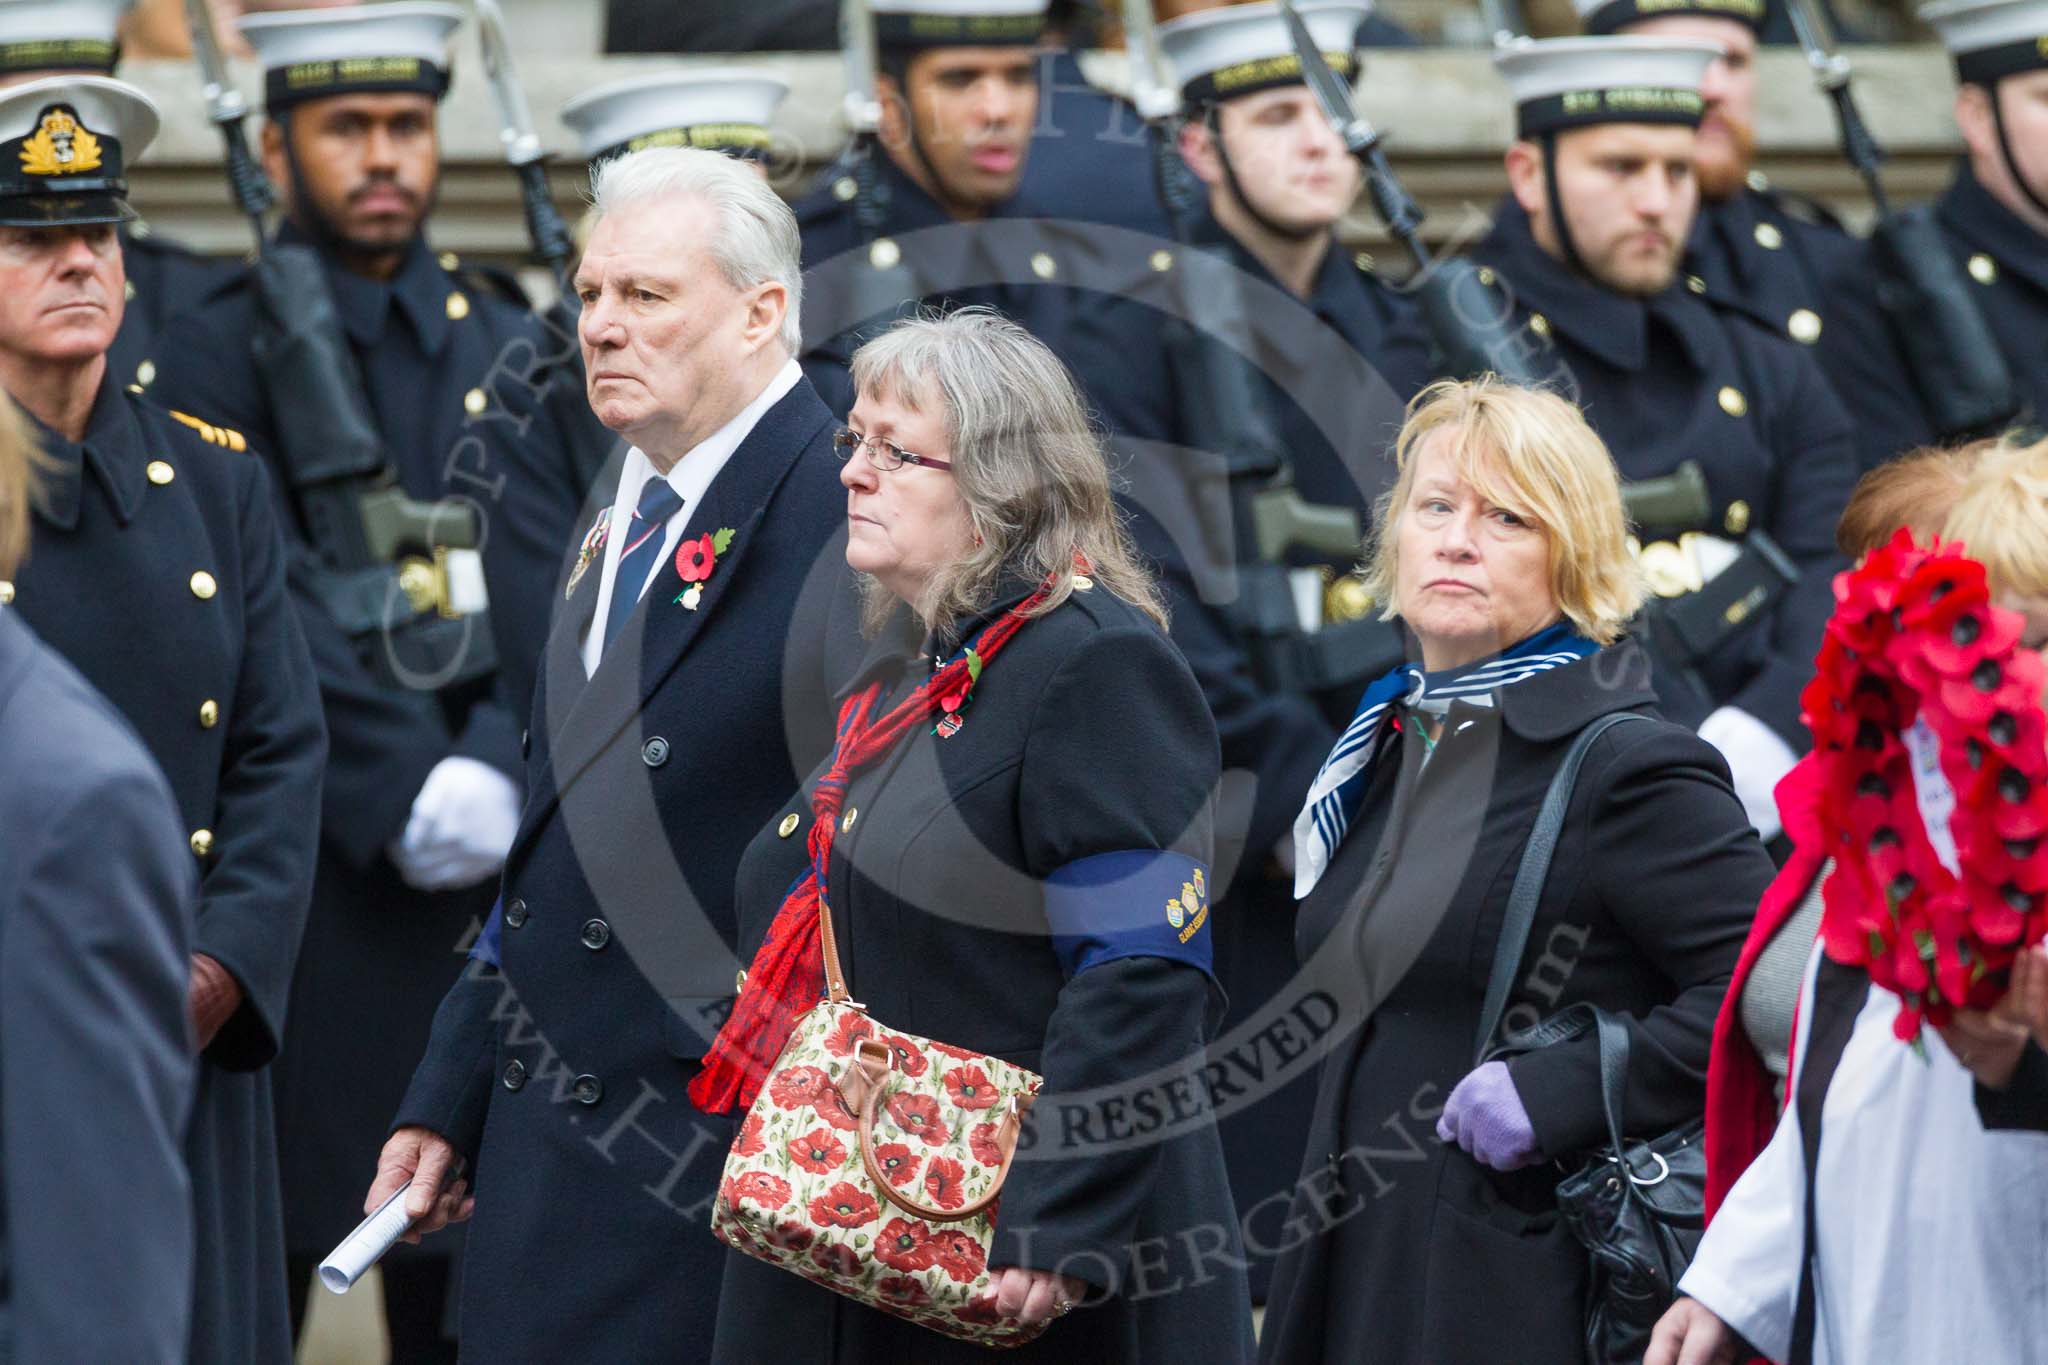 Remembrance Sunday at the Cenotaph 2015: Group M28, HM Ships Glorious Ardent & ACASTA Association.
Cenotaph, Whitehall, London SW1,
London,
Greater London,
United Kingdom,
on 08 November 2015 at 12:18, image #1612